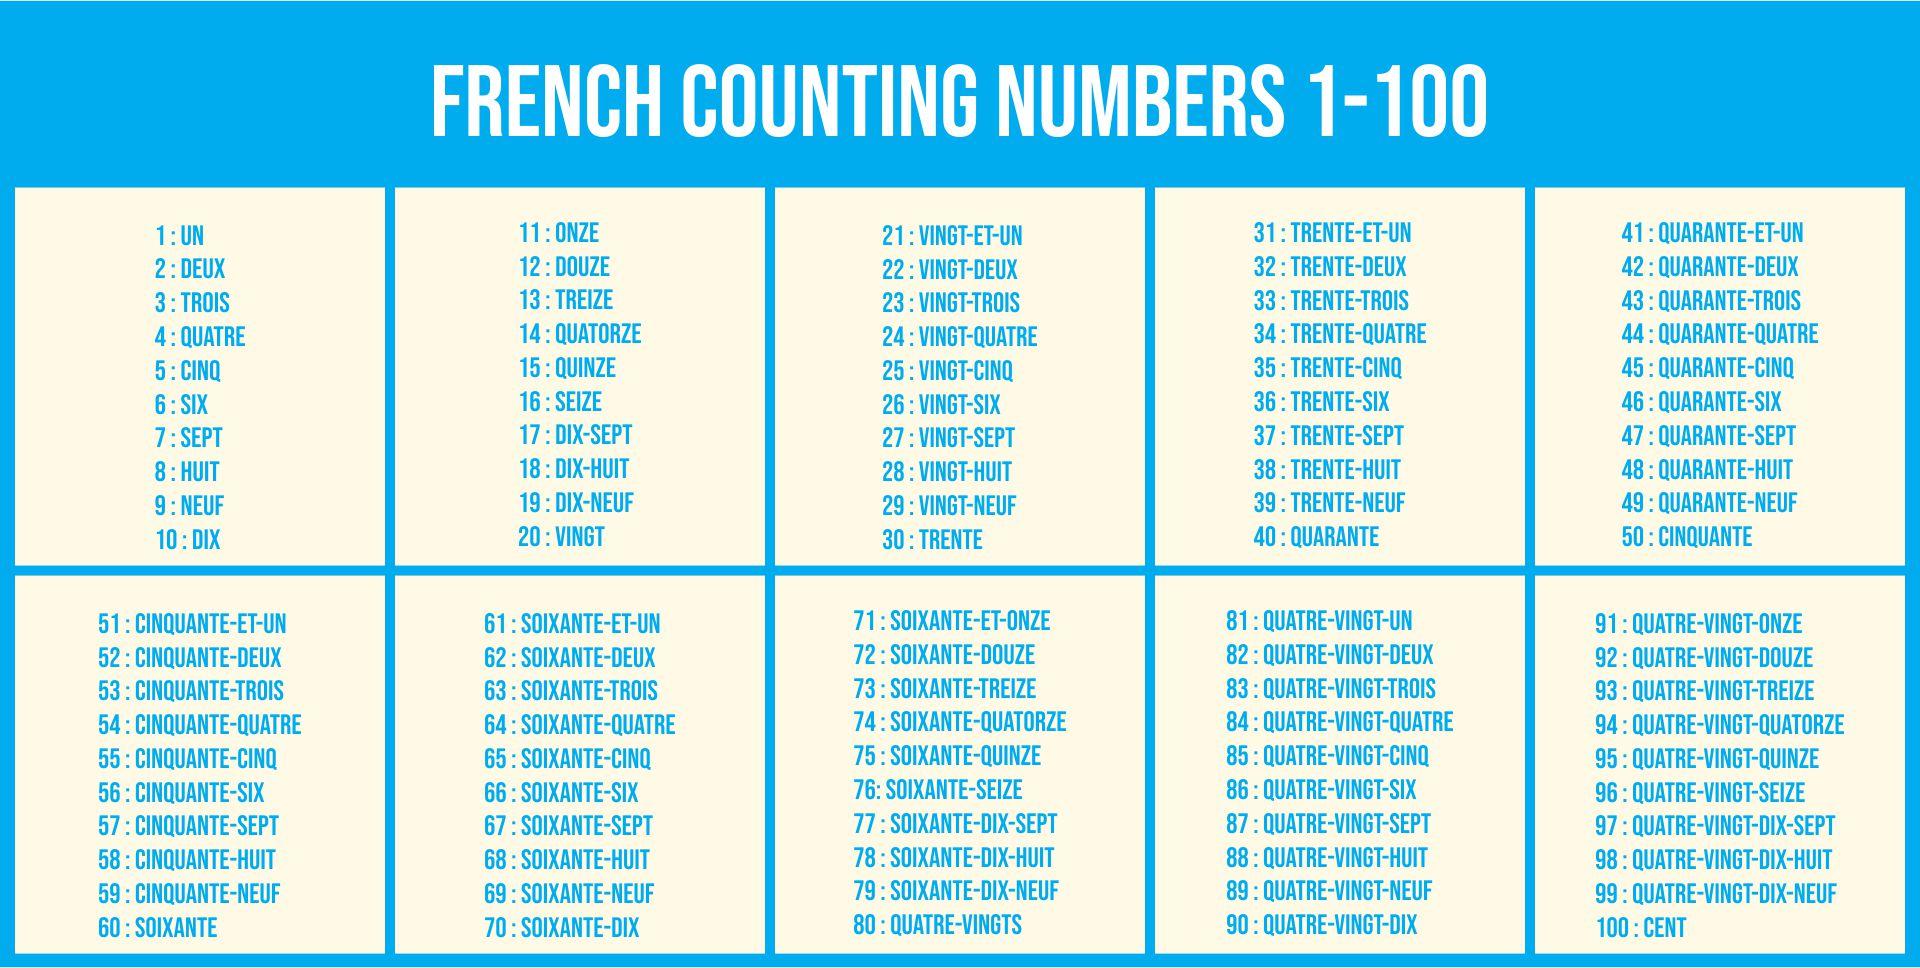 french numbers presentation